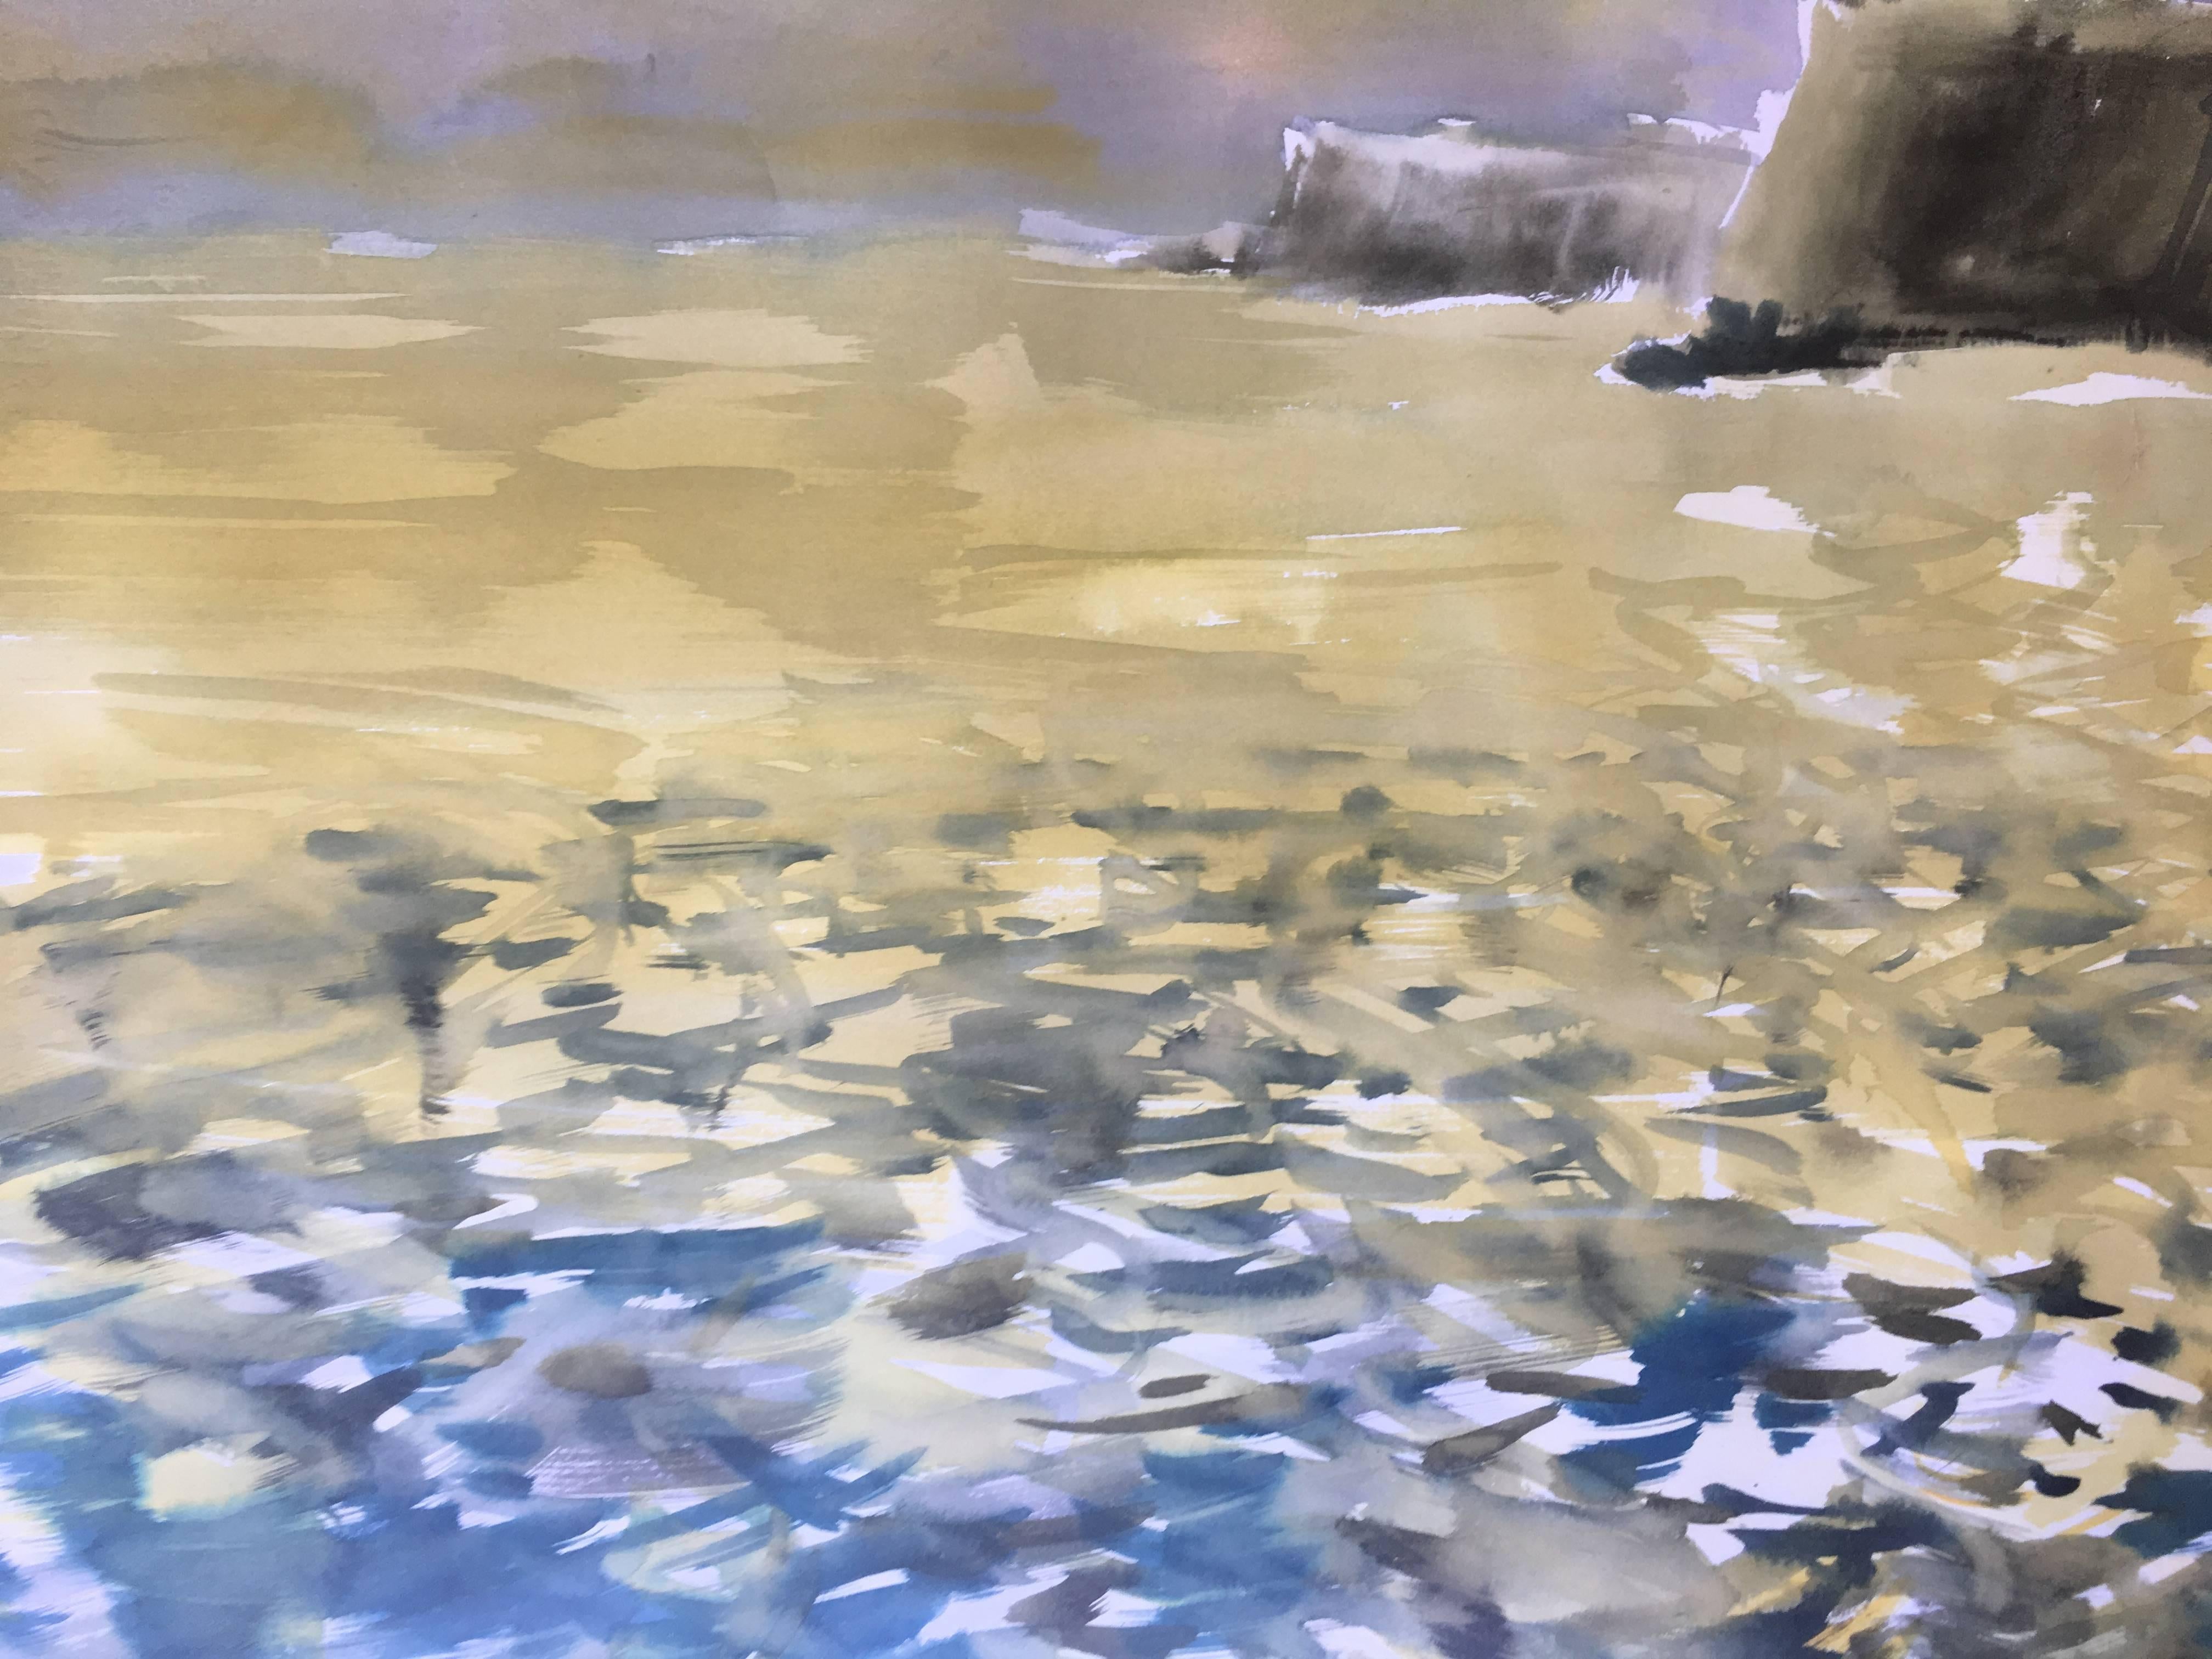  COAST. MAJORCA original watercolor painting. 
Julien was born in 1948 in Vichy, France. He studied art and theater in Clermont-Ferrand at the same time as finishing his degree in French Literature. Continuing with his interest in the movement, in